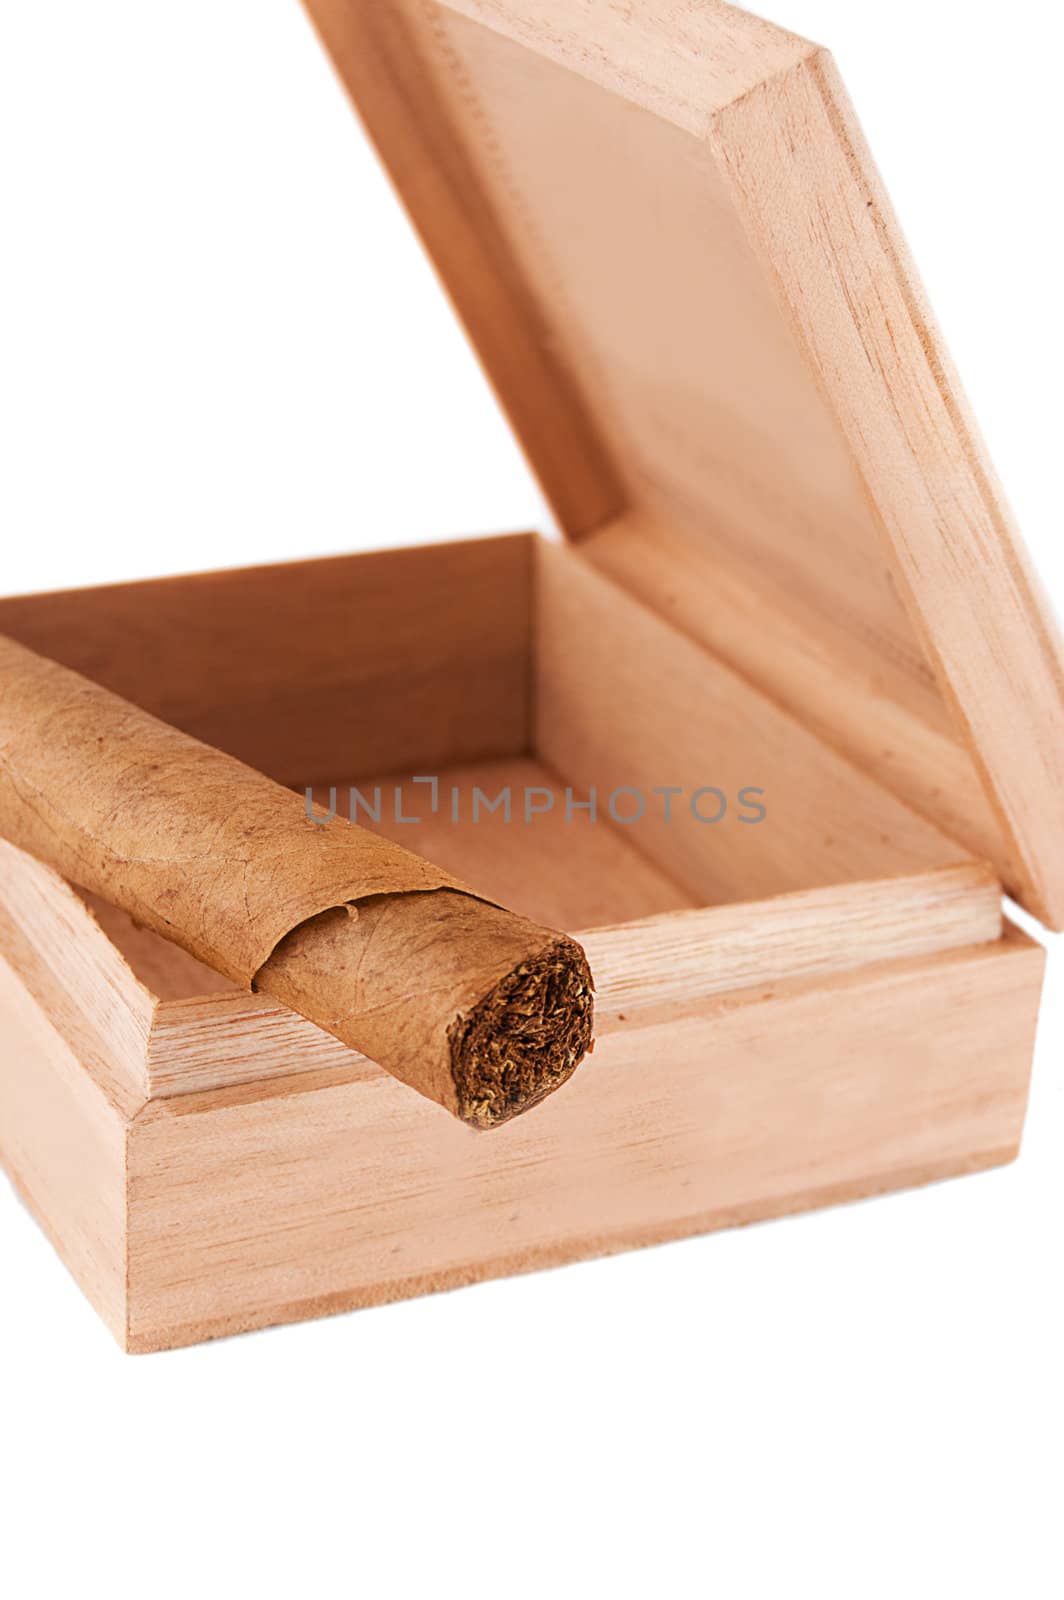 One left cigar in wooden box by Angel_a